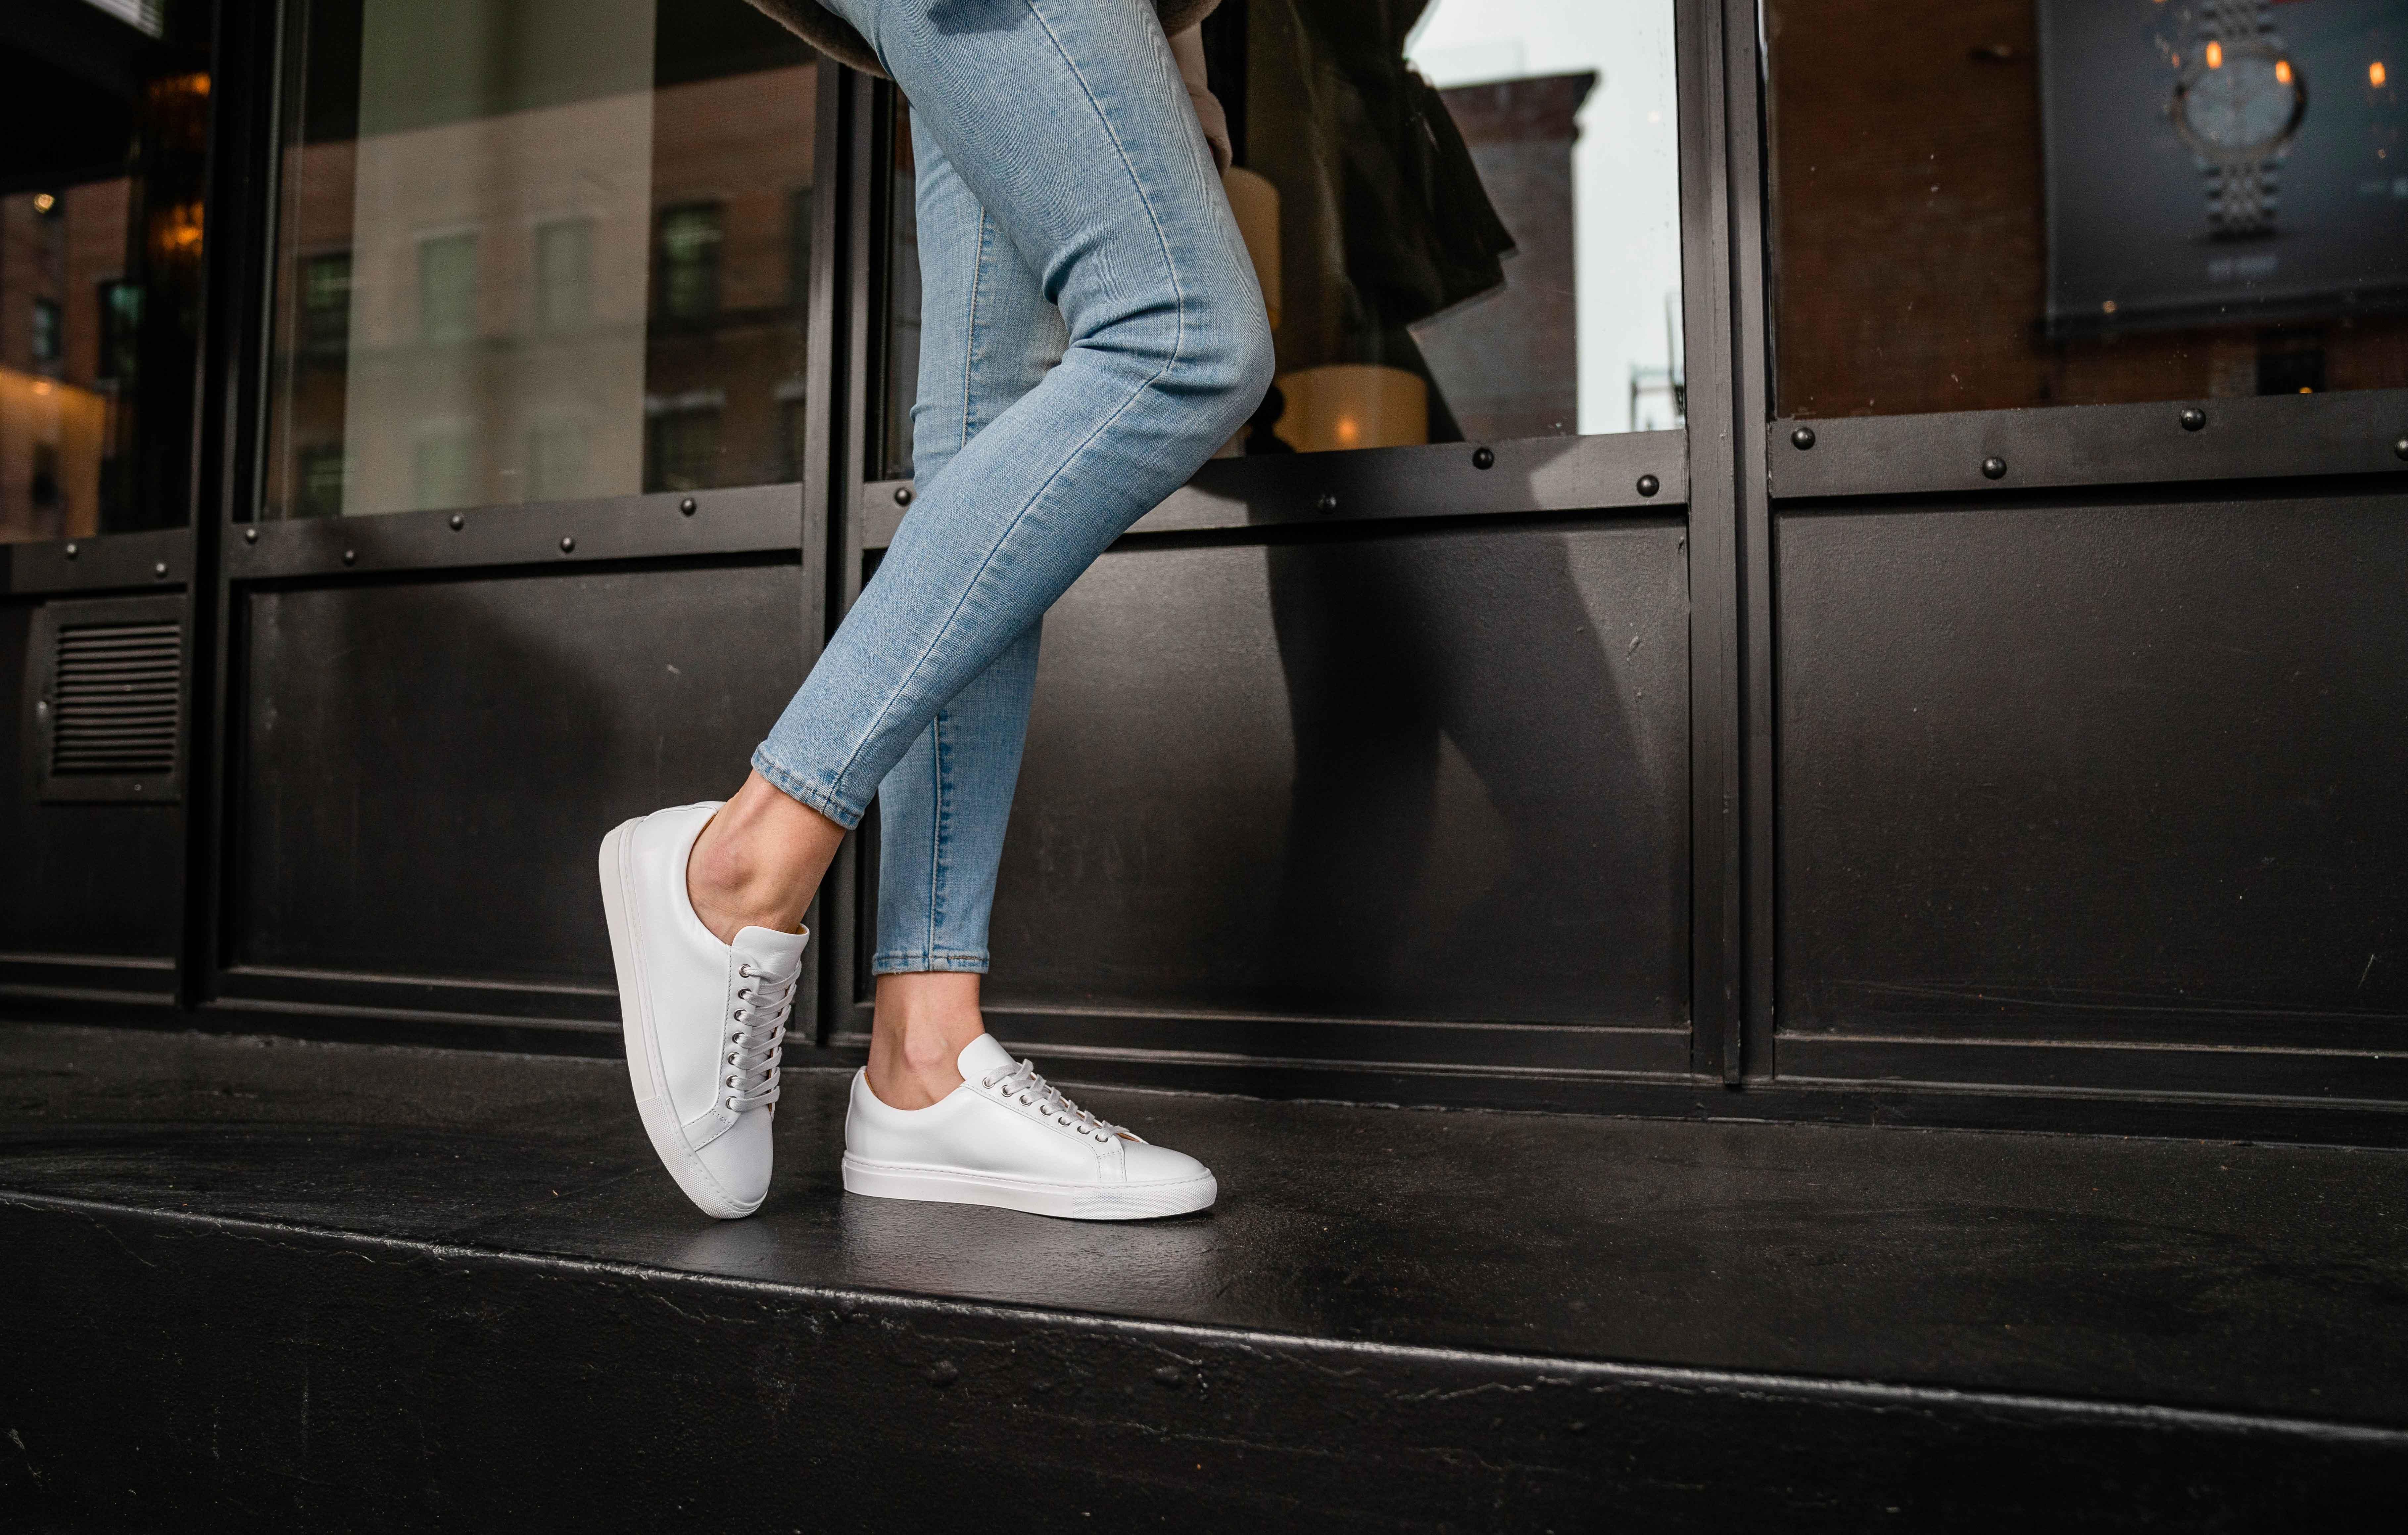 Thursday Boot Company - That's Vachetta for ya! Meet our newest addition to  our growing high top sneaker line @thursdaysneakers, the Natural Vachetta  High Top Premier. This premier is a unique shoe